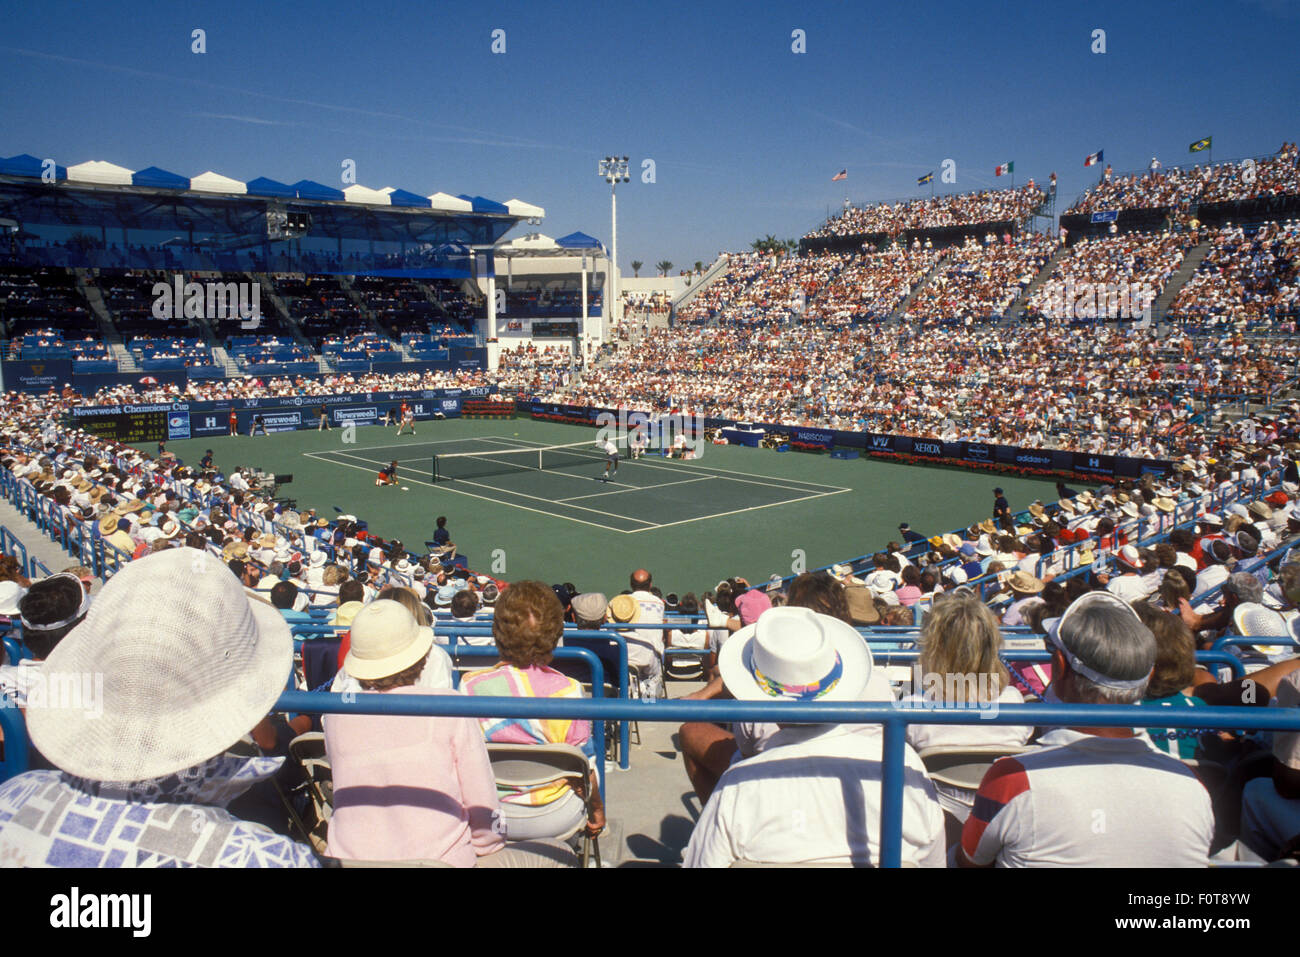 Stadium full of spectators at the Newsweek Champions Cup tournament in Indian Wells, California in March 1988. Stock Photo